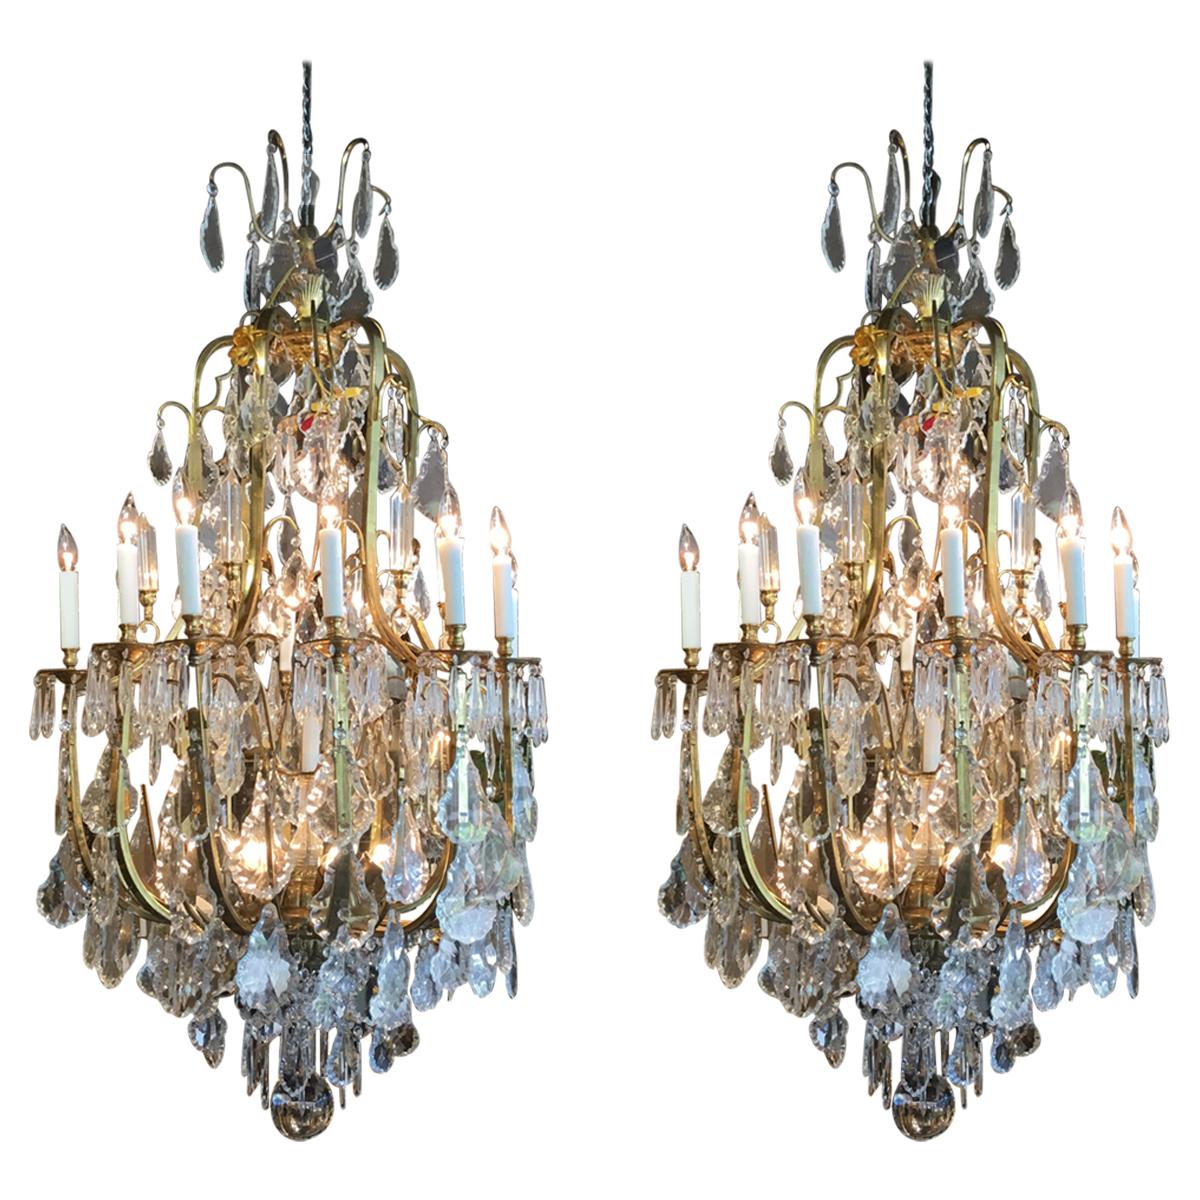 Pair of Large Italian Bronze and Crystal Chandeliers with 20 Lights